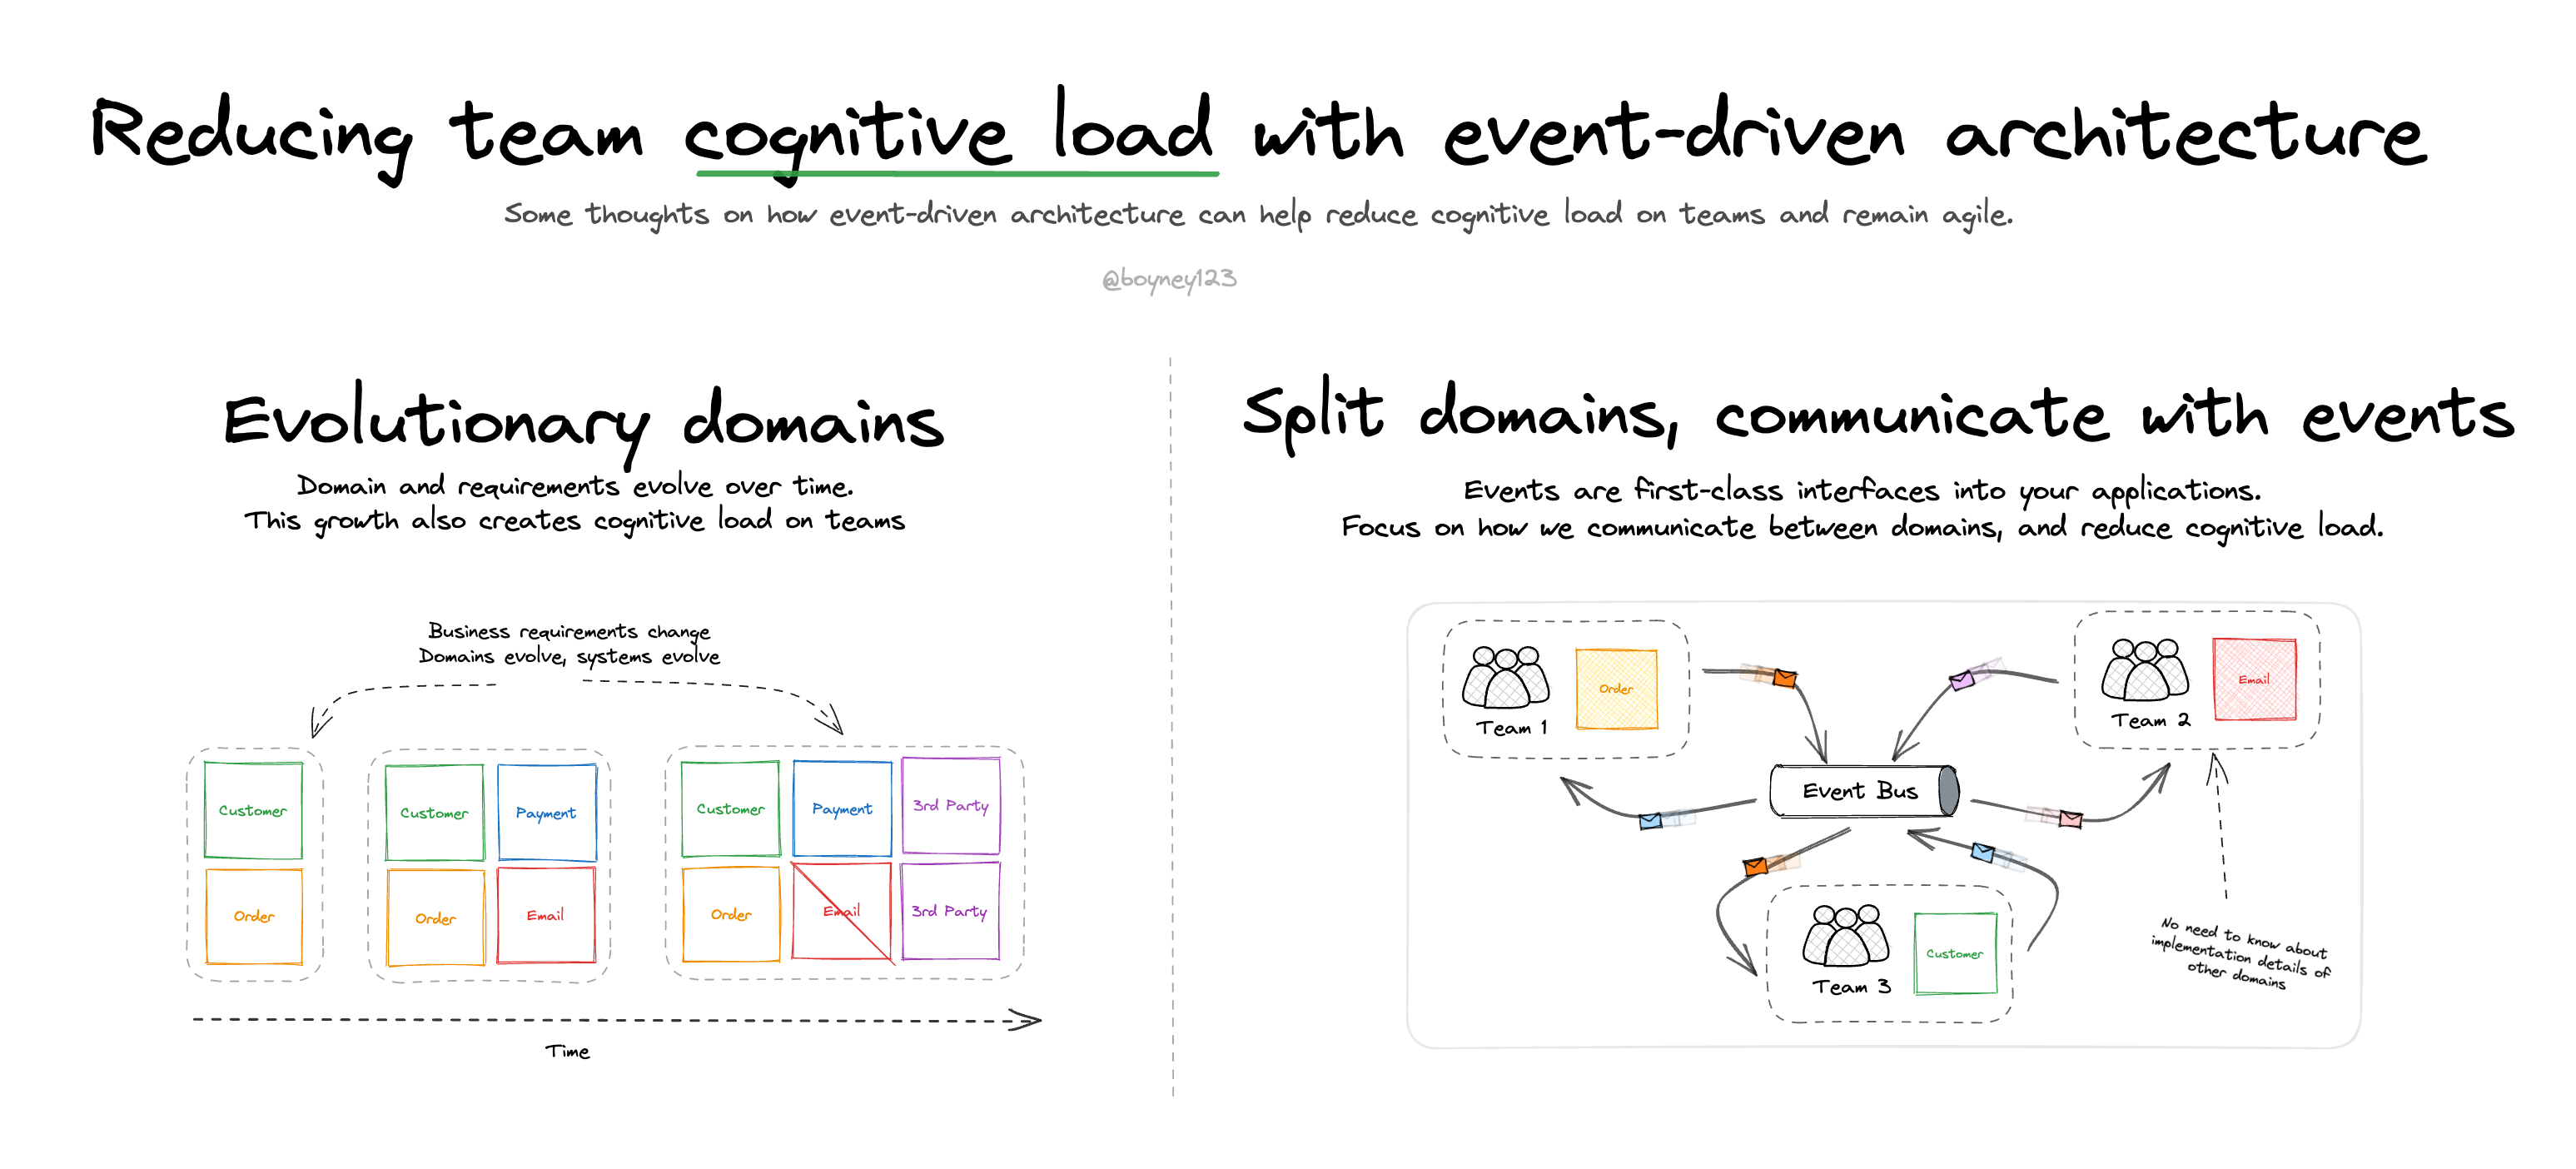 Reducing team cognitive load with event-driven architectures